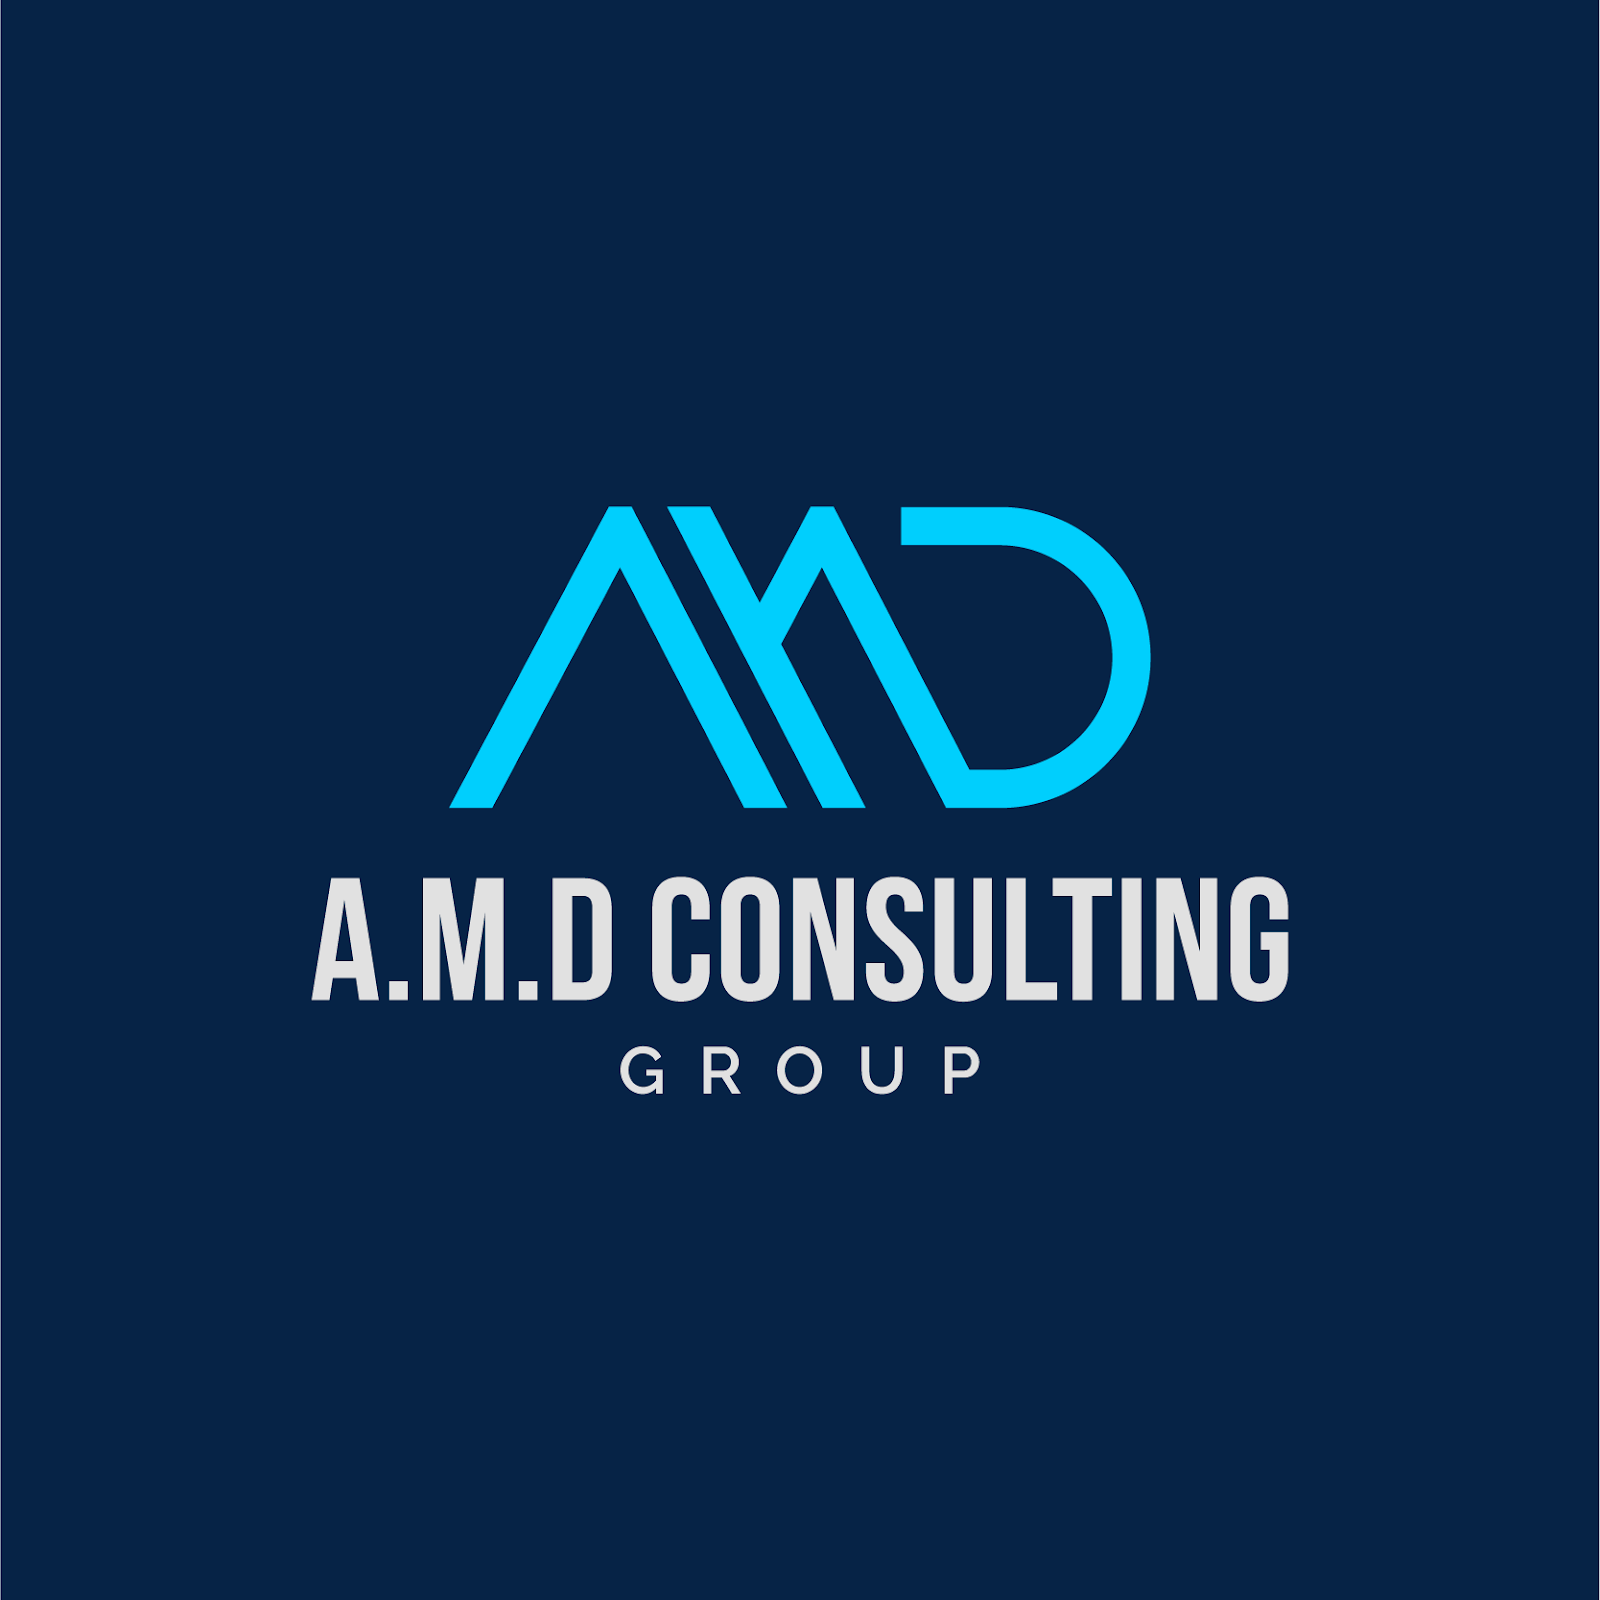 AMD Consulting Group, Tuesday, March 29, 2022, Press release picture